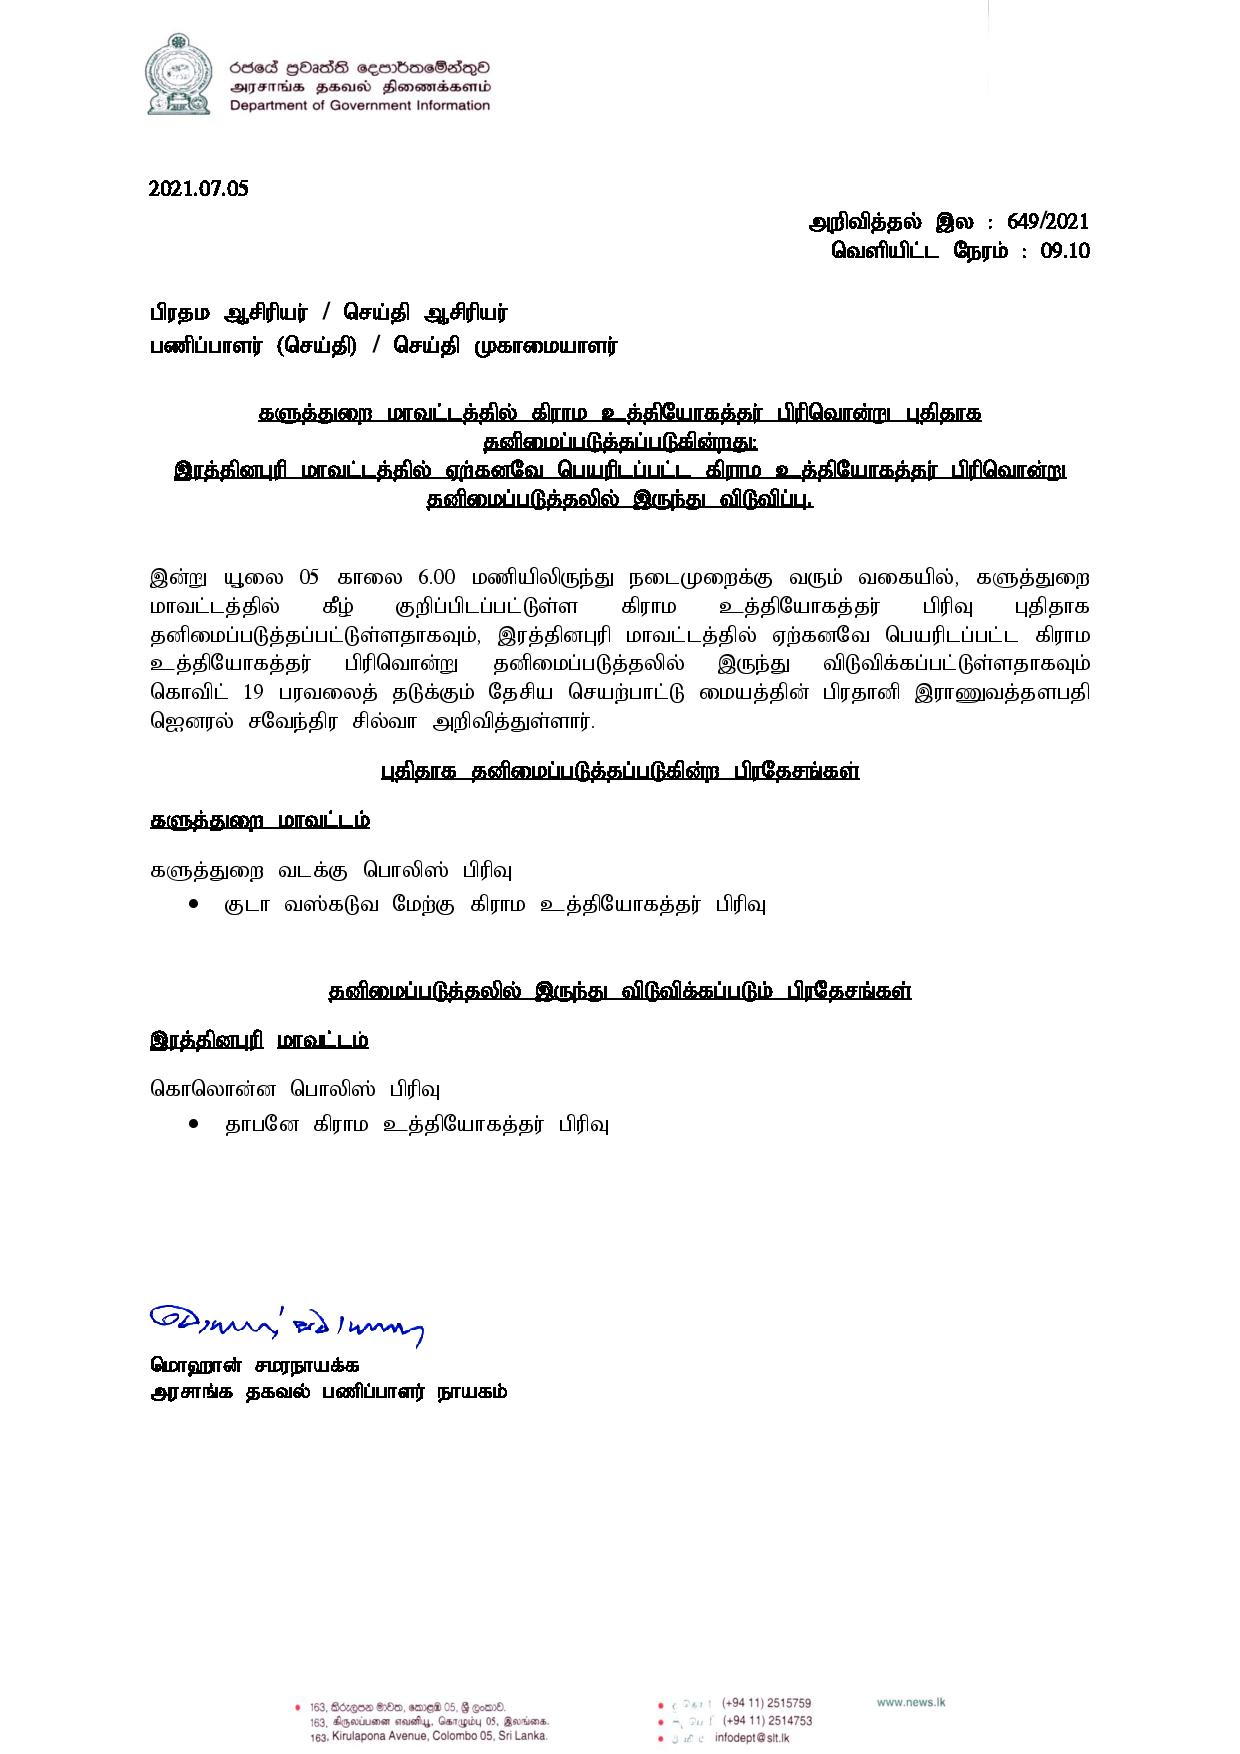 Press Release 649 Tamil page 001